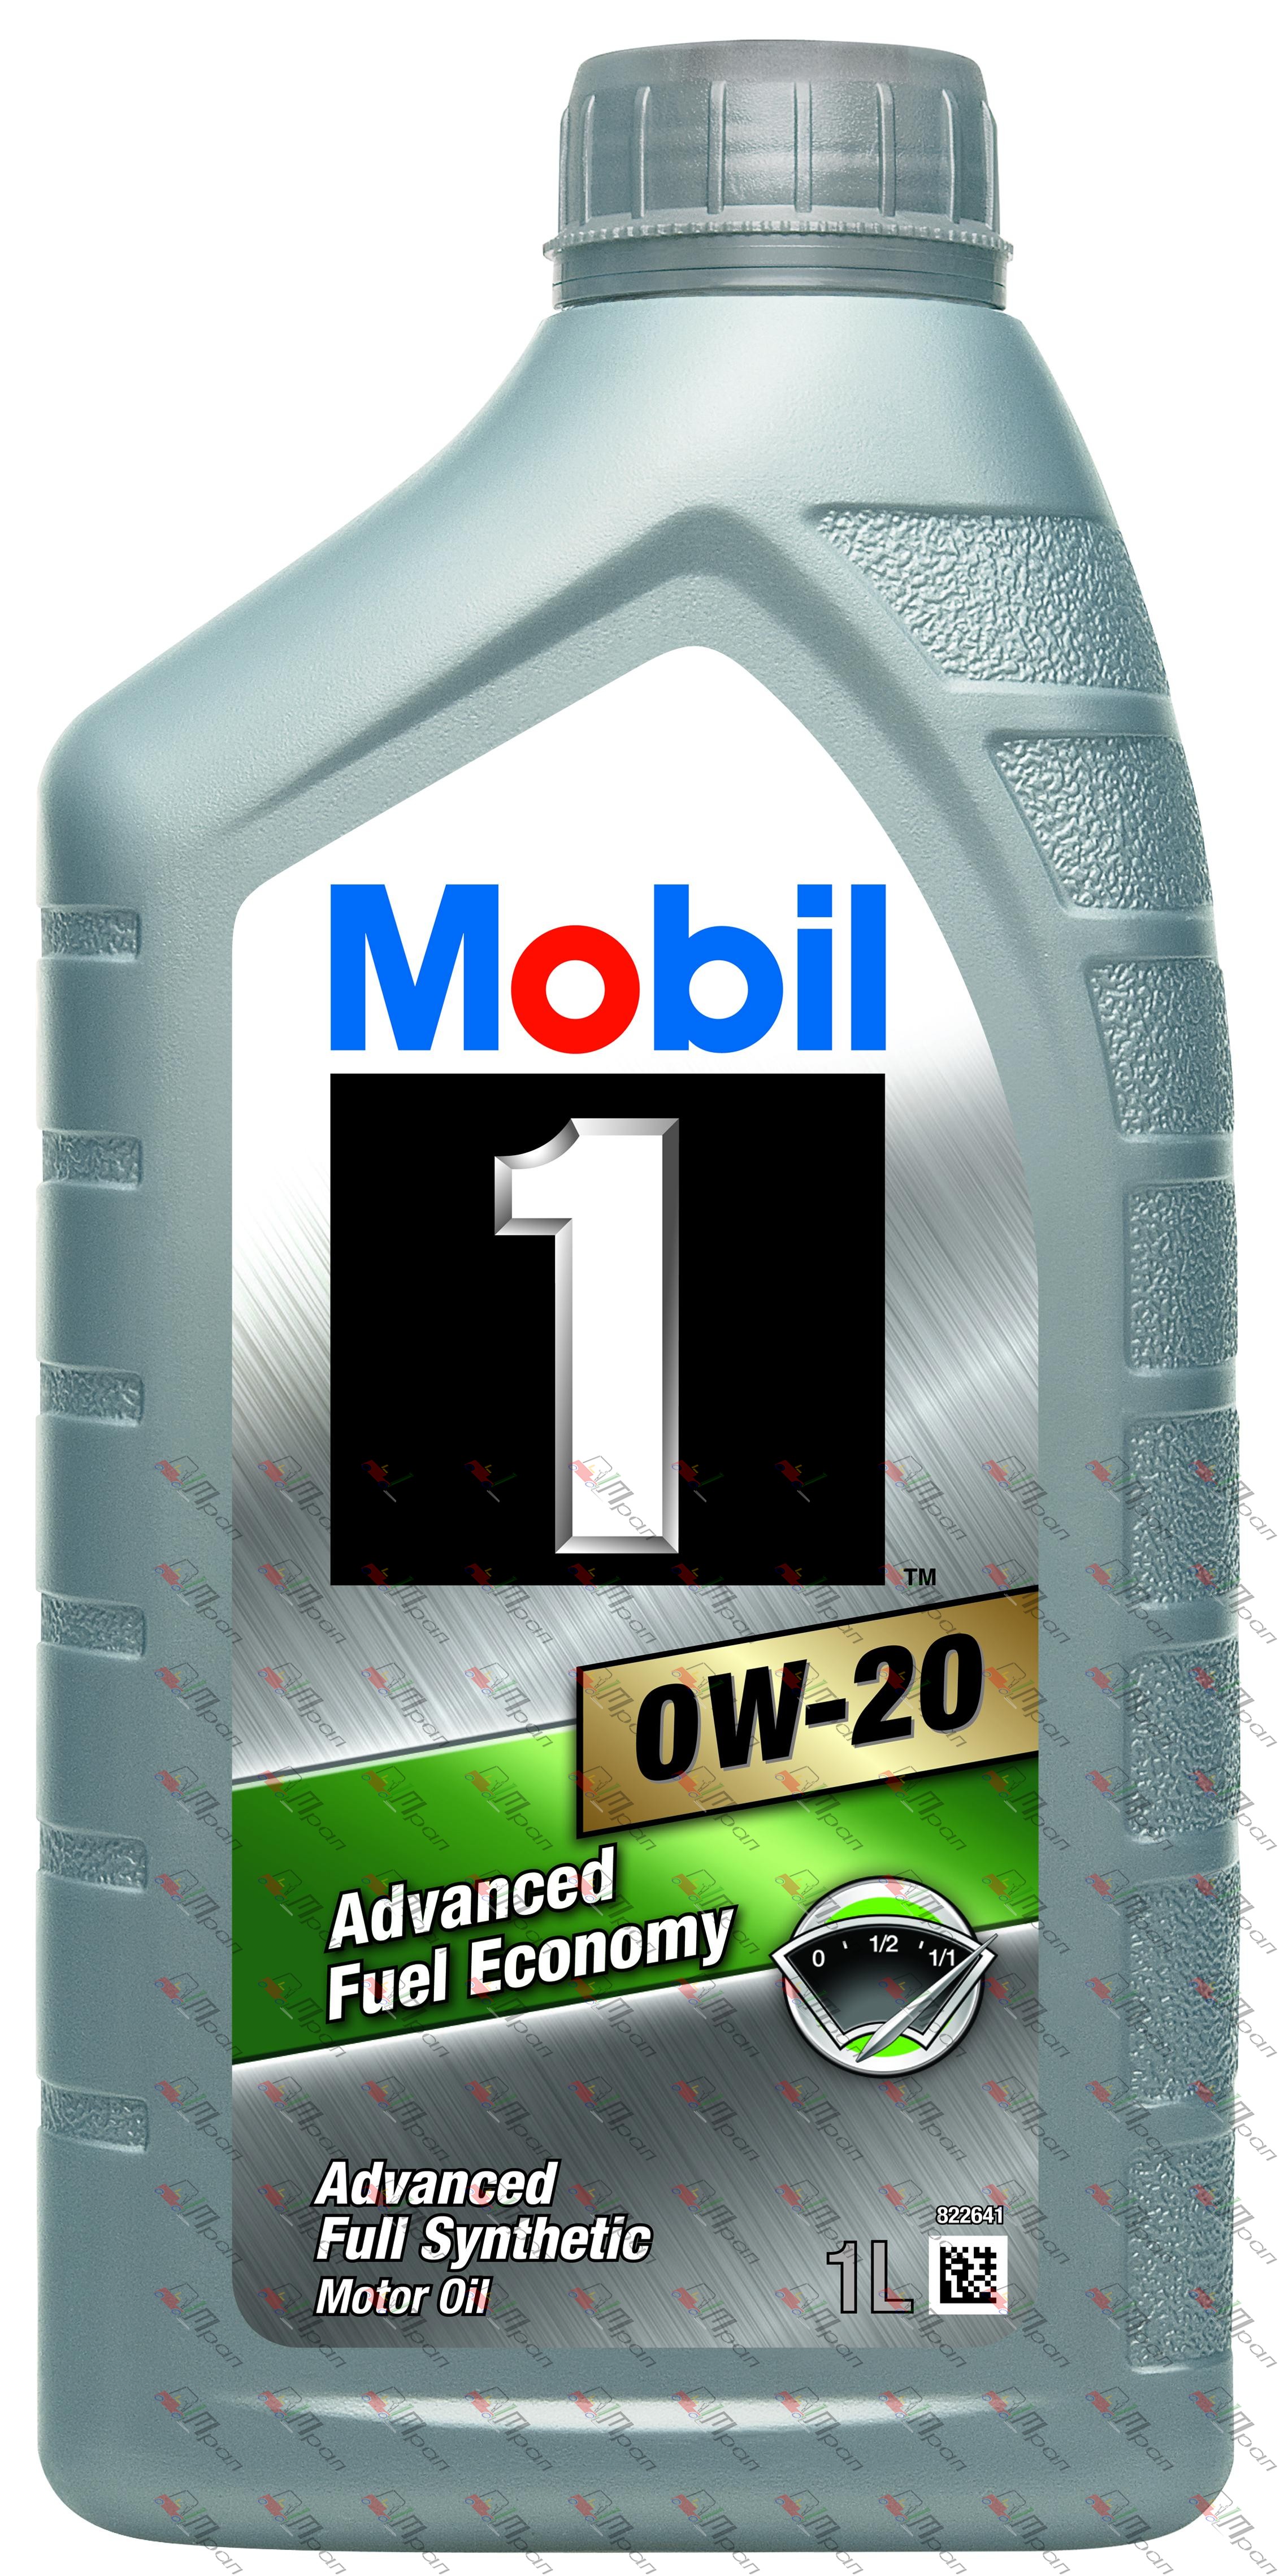 Mobil Масло моторное синтетич. Mobil 1 FE 0w20 1л